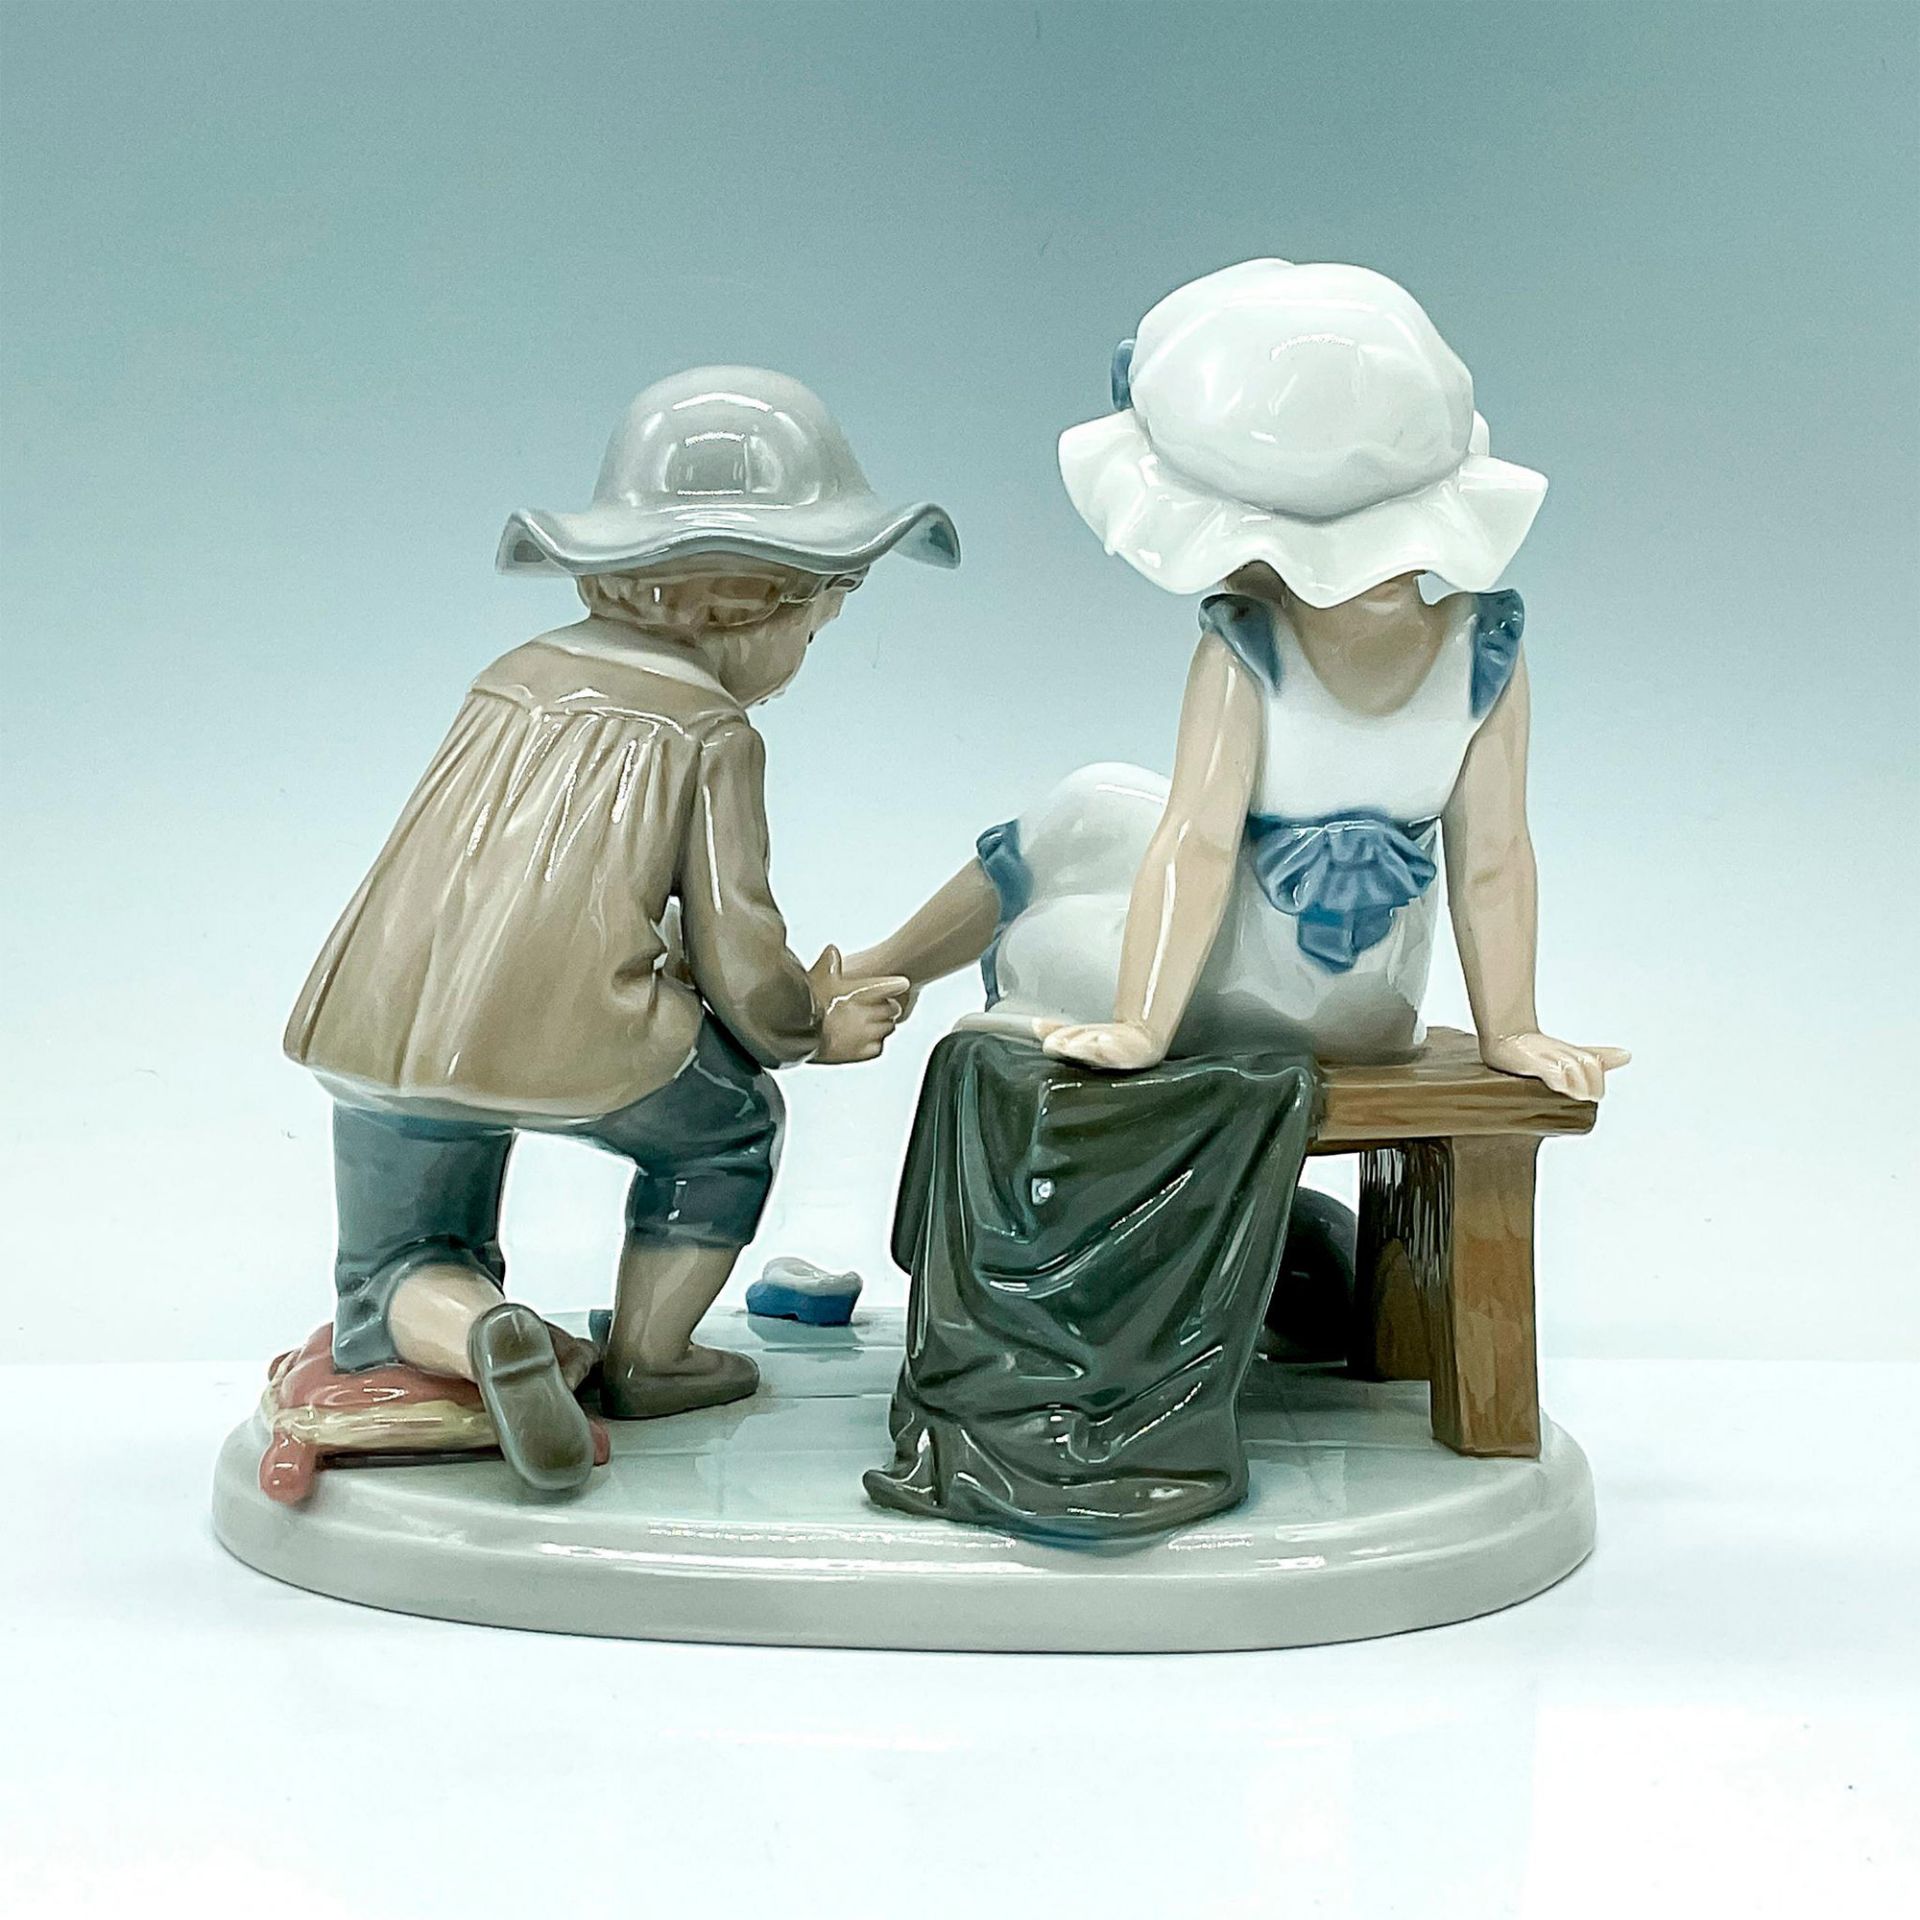 Try This One 1005361 - Lladro Figurine - Image 2 of 3